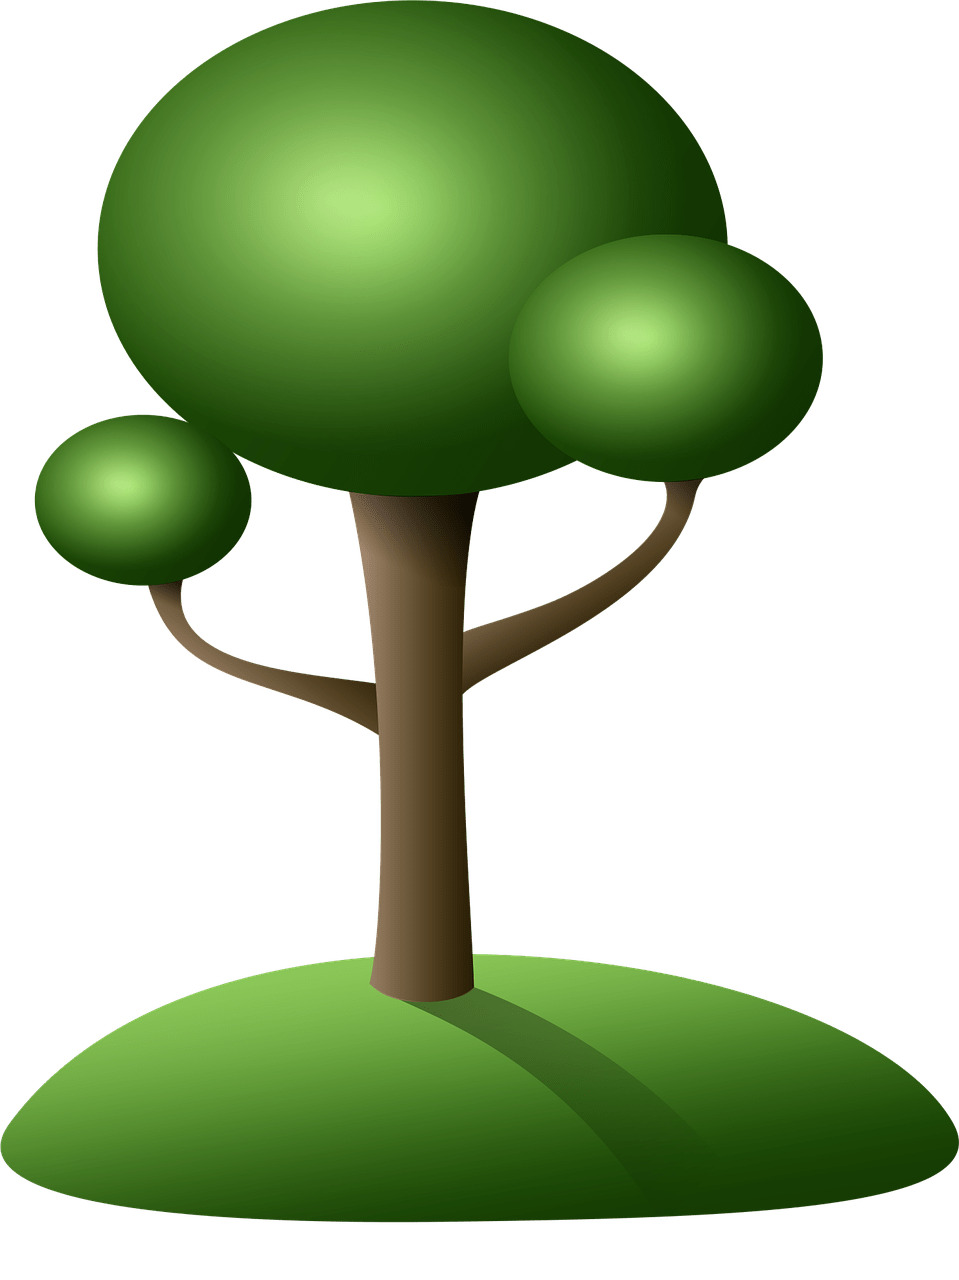 Tree Clipart icons